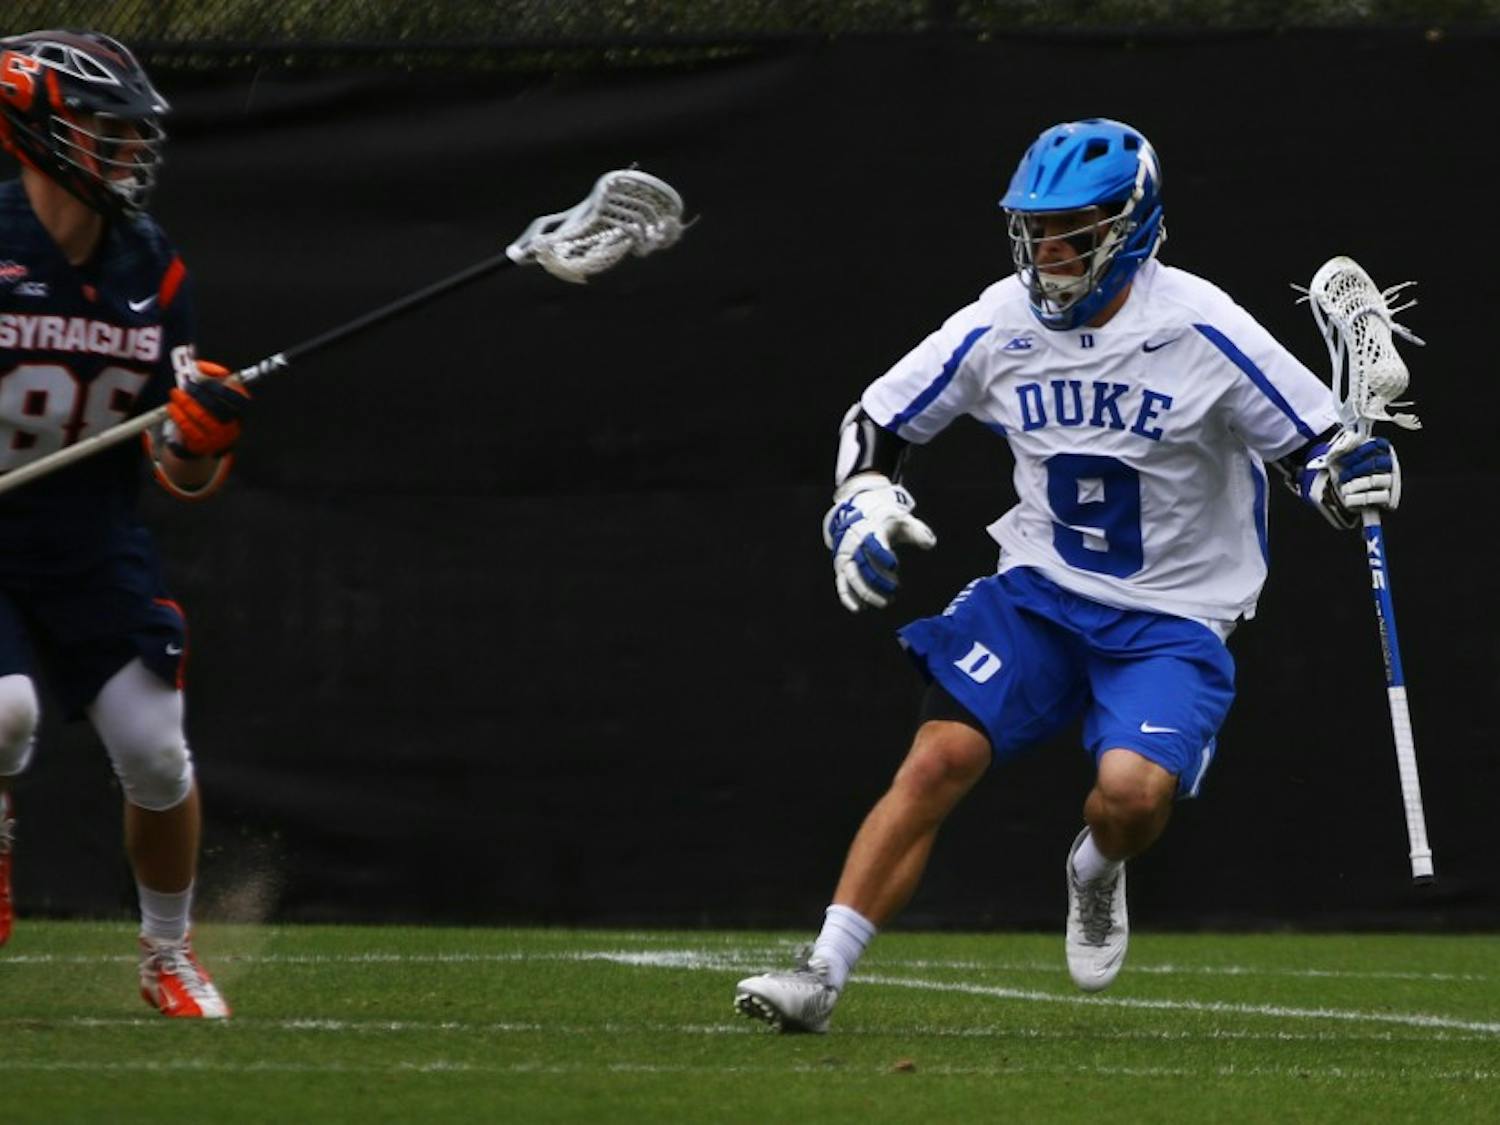 Senior Case Matheis has recorded 20 goals and 21 assists this season for the Blue Devils, who face a crucial test Sunday at Virginia.&nbsp;